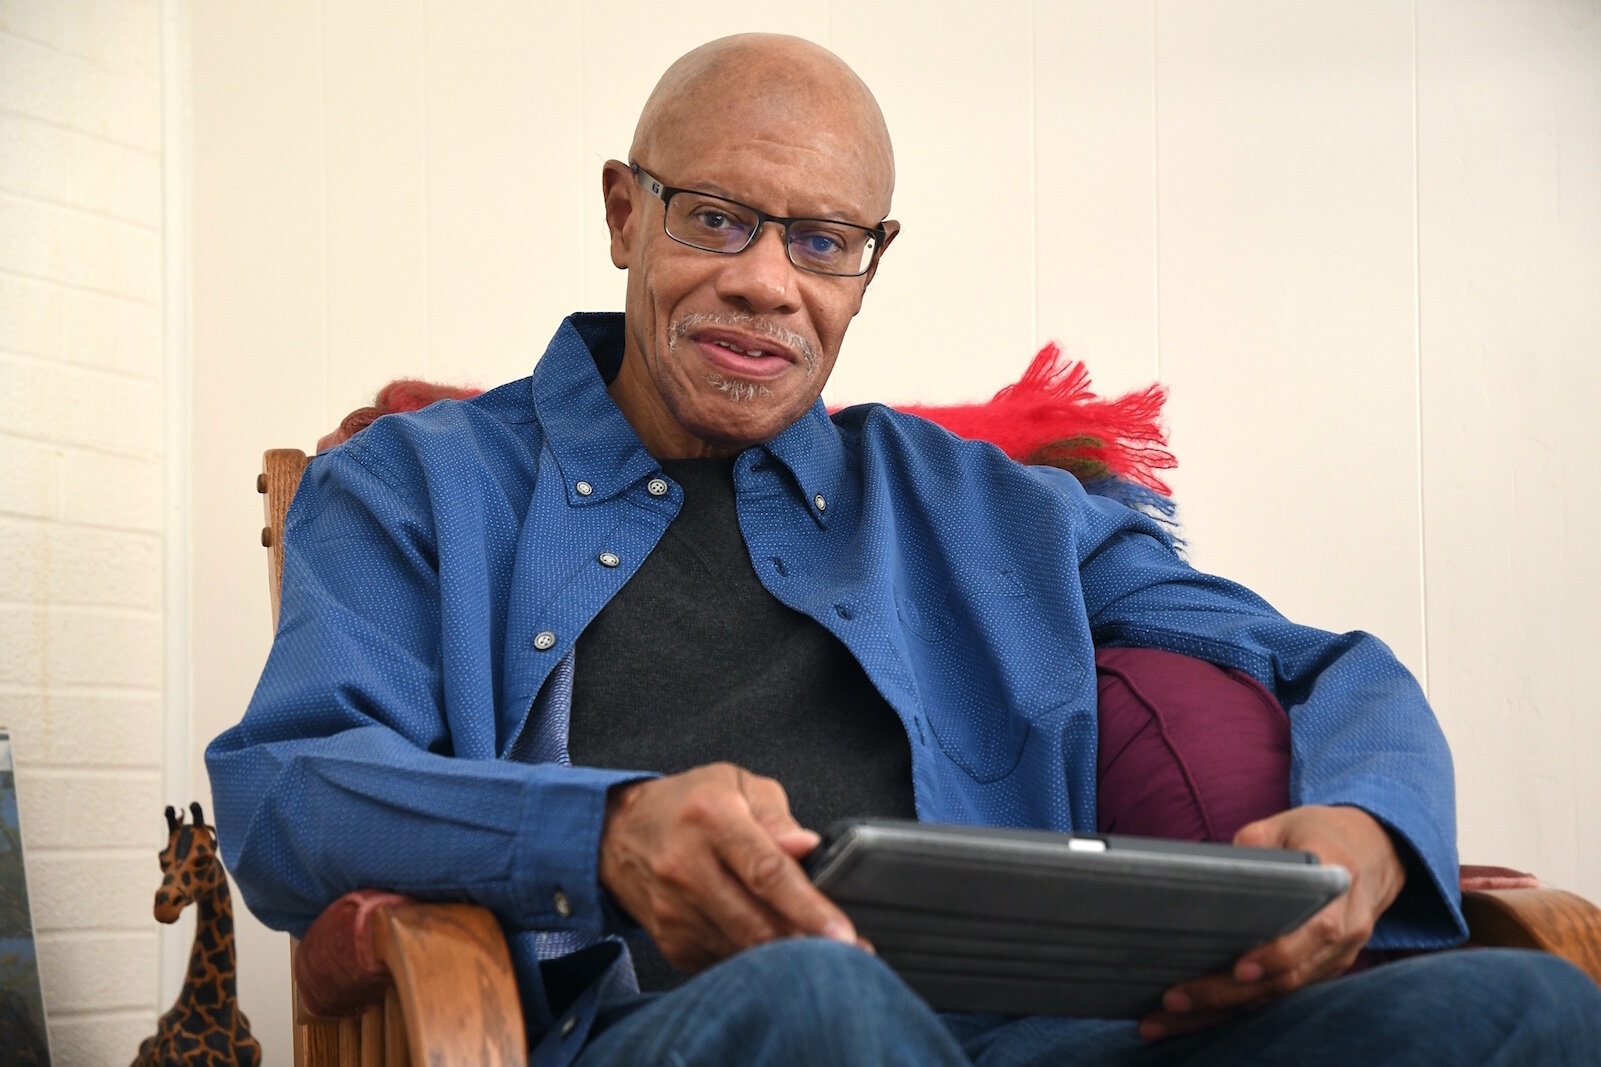 Leonard Harris does most of his reading on a tablet.